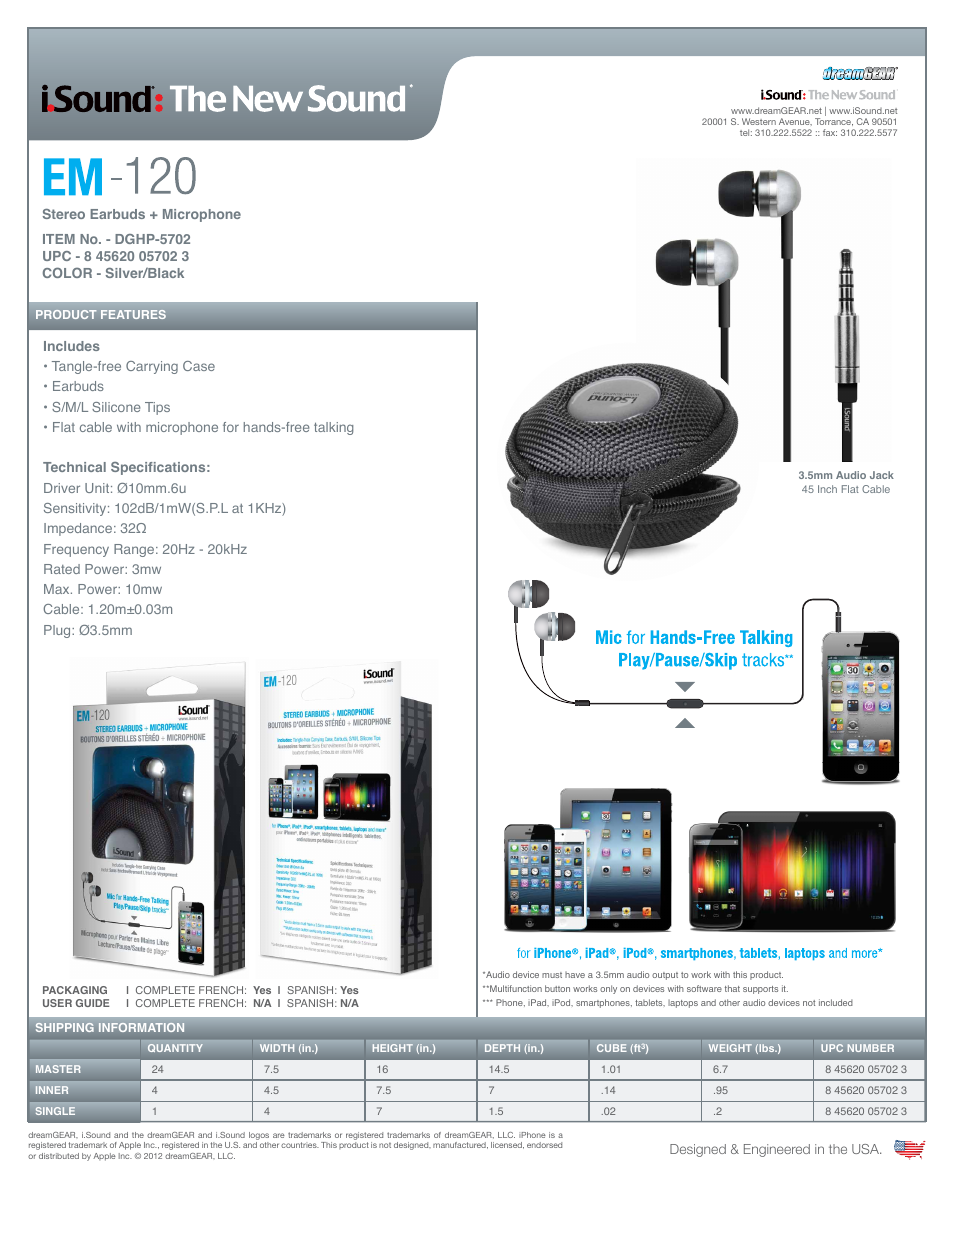 EM-120 Stereo Earbuds + Microphone - Sell Sheet